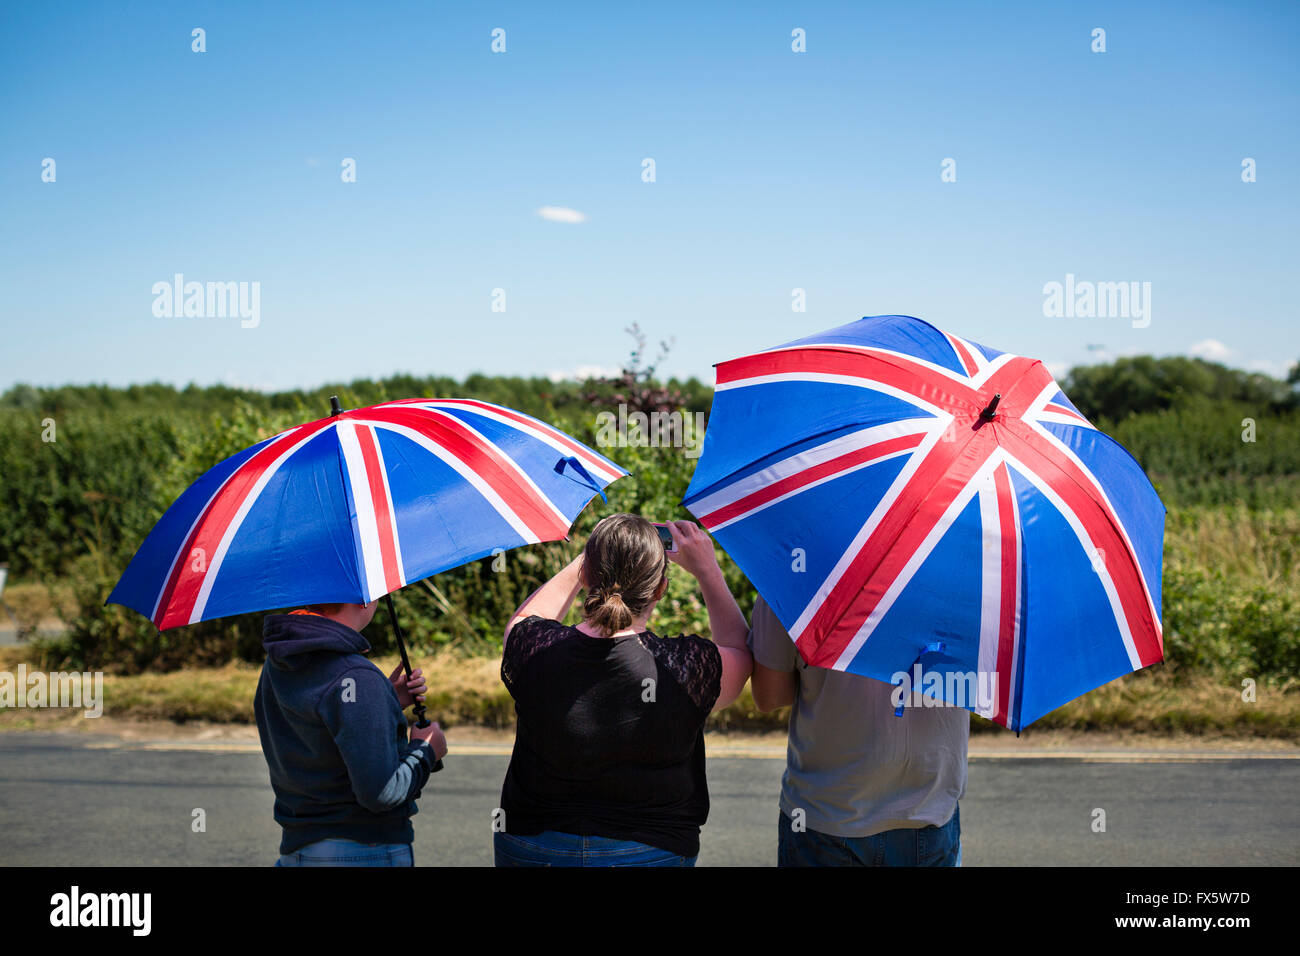 Plane spotters taking pictures of the old Avro Vulcan aircraft from underneath union jack umbrellas. Stock Photo